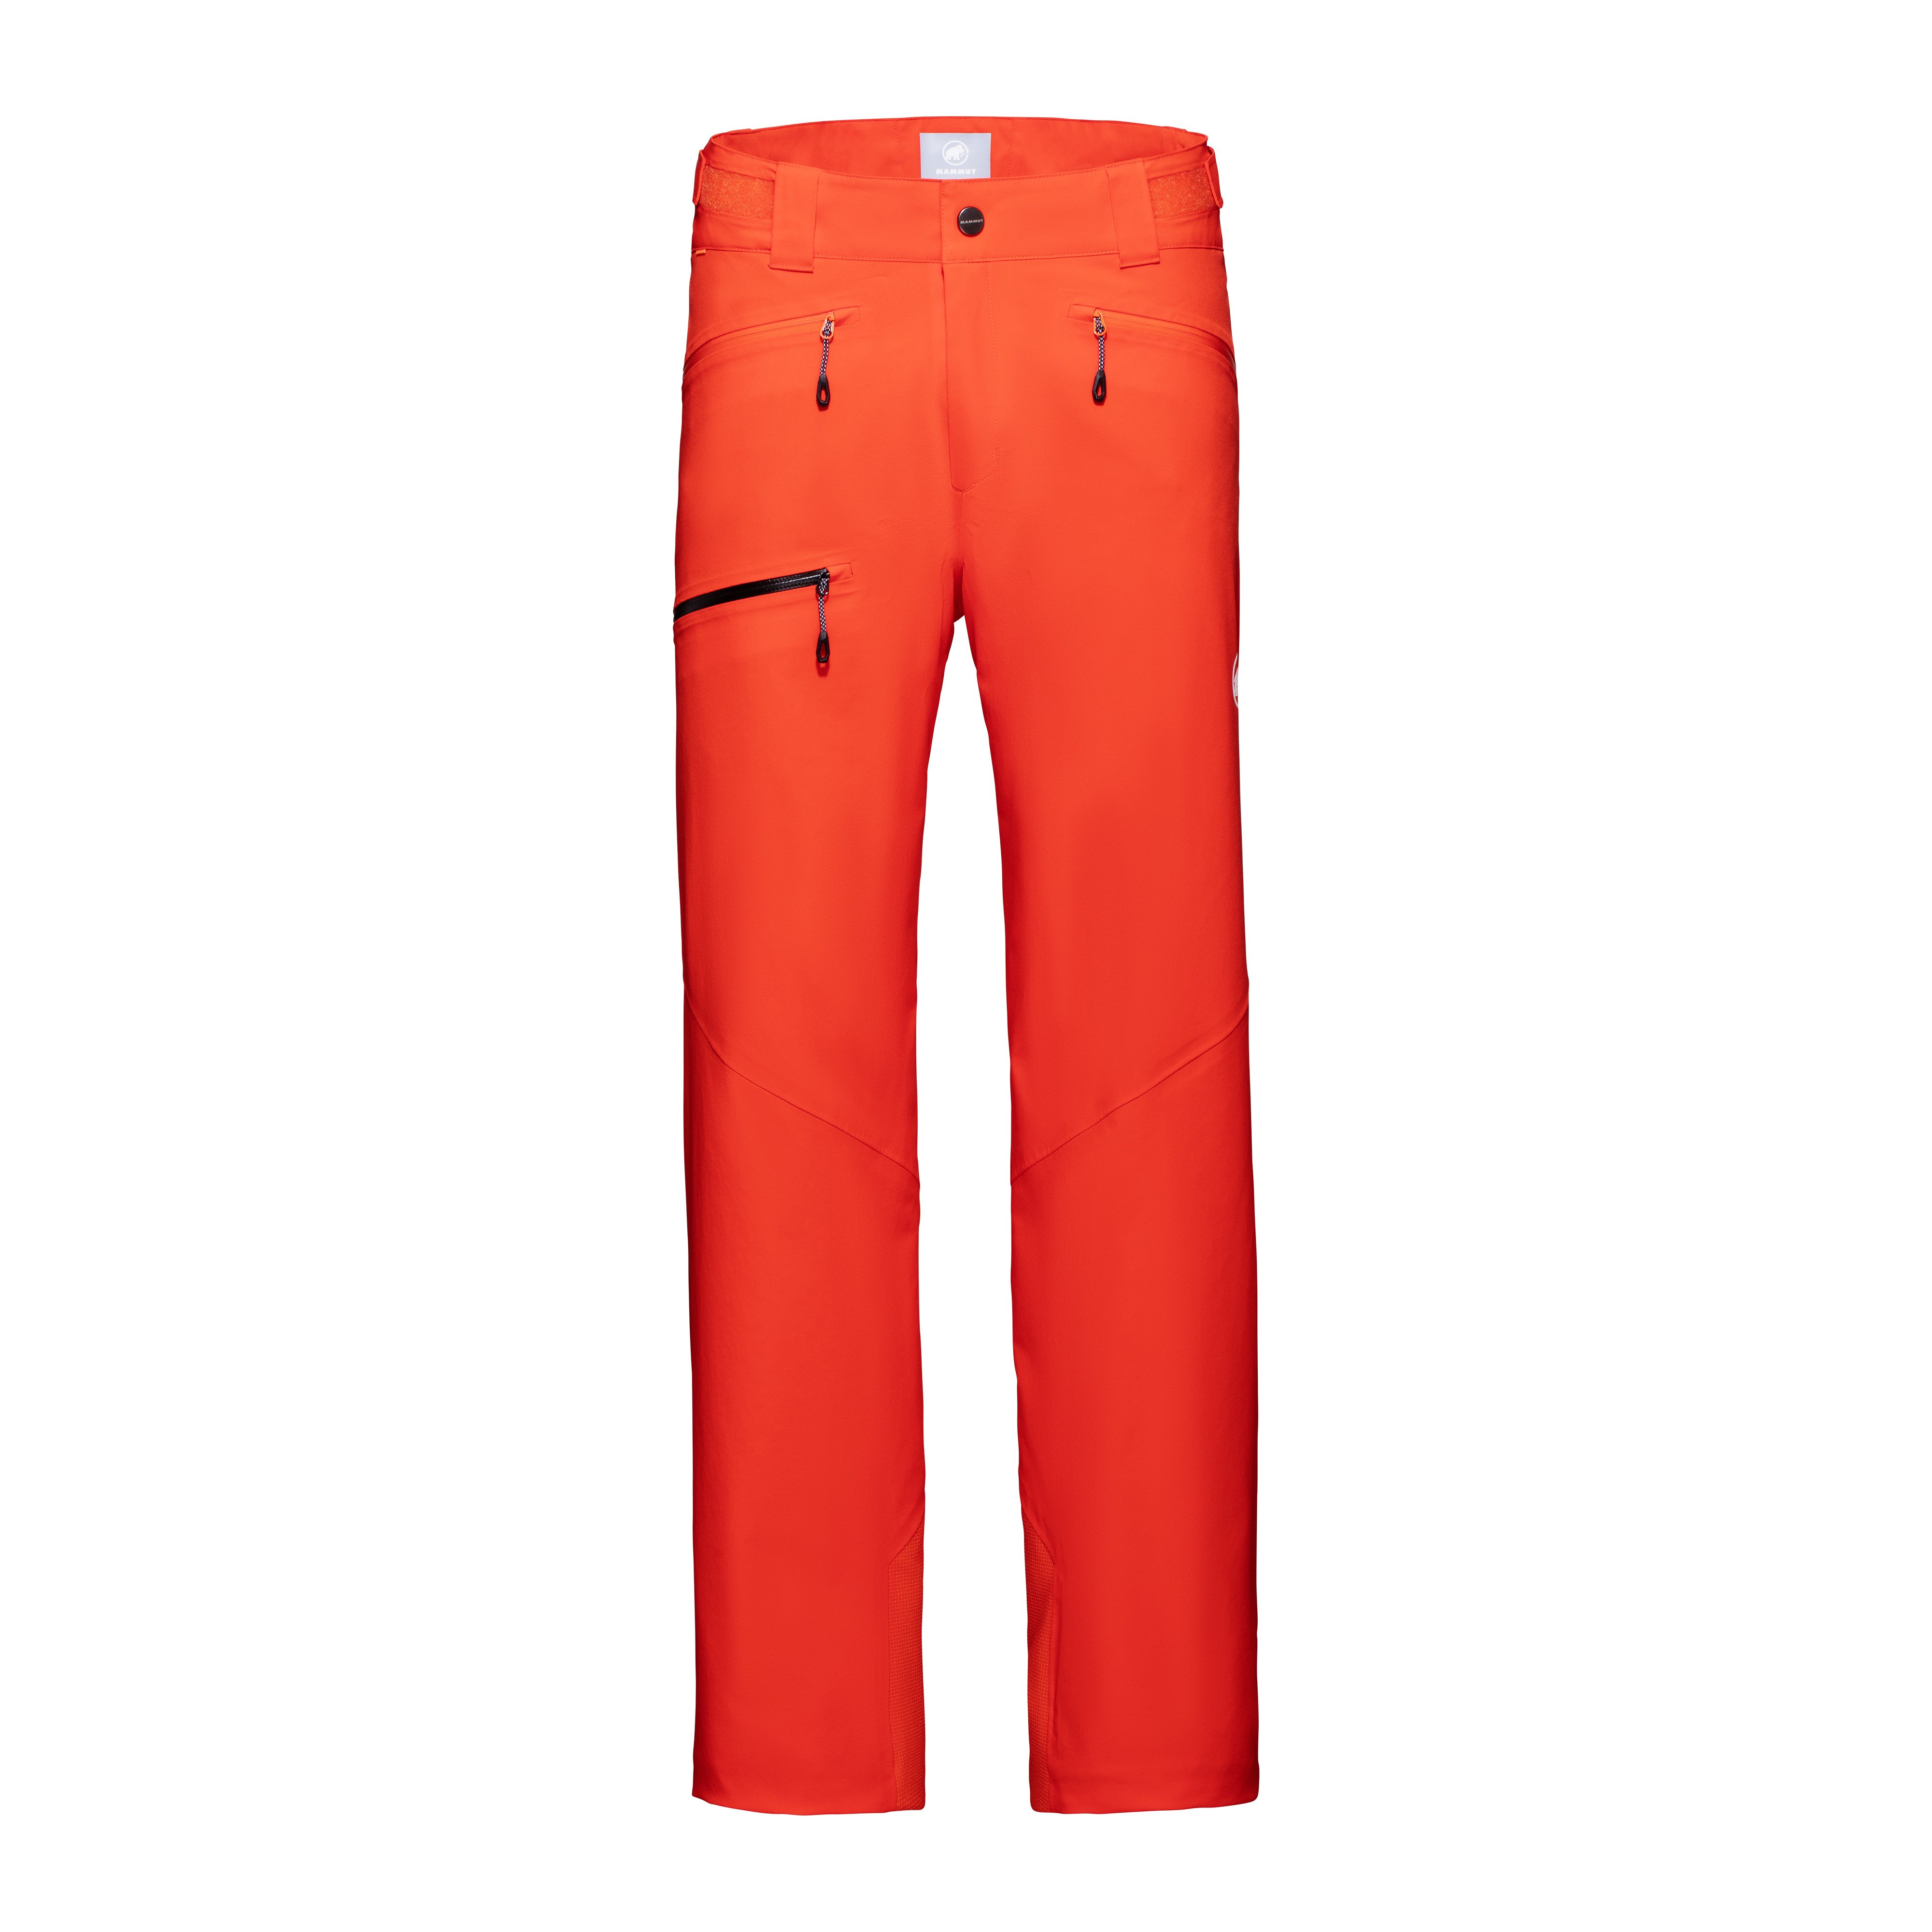 Stoney HS Thermo Pants Men - hot red, US 28 thumbnail